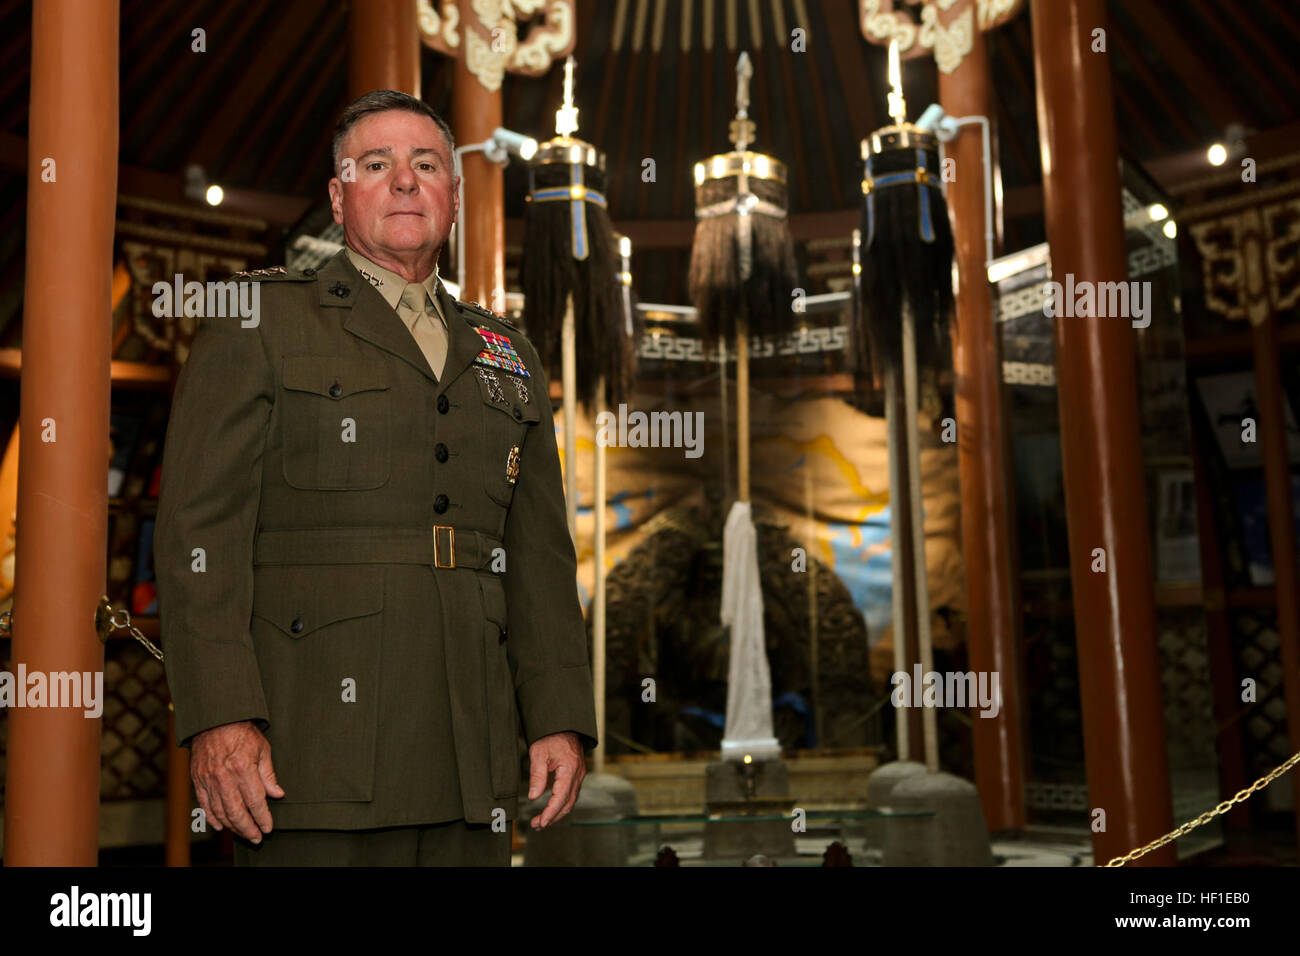 U.S. Marine Lt. Gen. Terry G. Robling, Commander, U.S. Marine Corps Forces, Pacific stands in front of the  Mongolian Black Banners from the era of Chinggis Khaan at the Ministry of Defense in Ulaanbaatar, Mongolia on Aug. 15, 2013. Khaan Quest is an annual multinational exercise sponsored by the U.S. and Mongolia, and it is designed to strengthen the capabilities of U.S., Mongolian and other nations' forces in international peace support operations. (U.S. Marine Corps photo by Cpl. Robert Bush) US Marine Lt Gen Terry G Robling Commander US Marine Corps Forces Pacific stands in front of the Mo Stock Photo